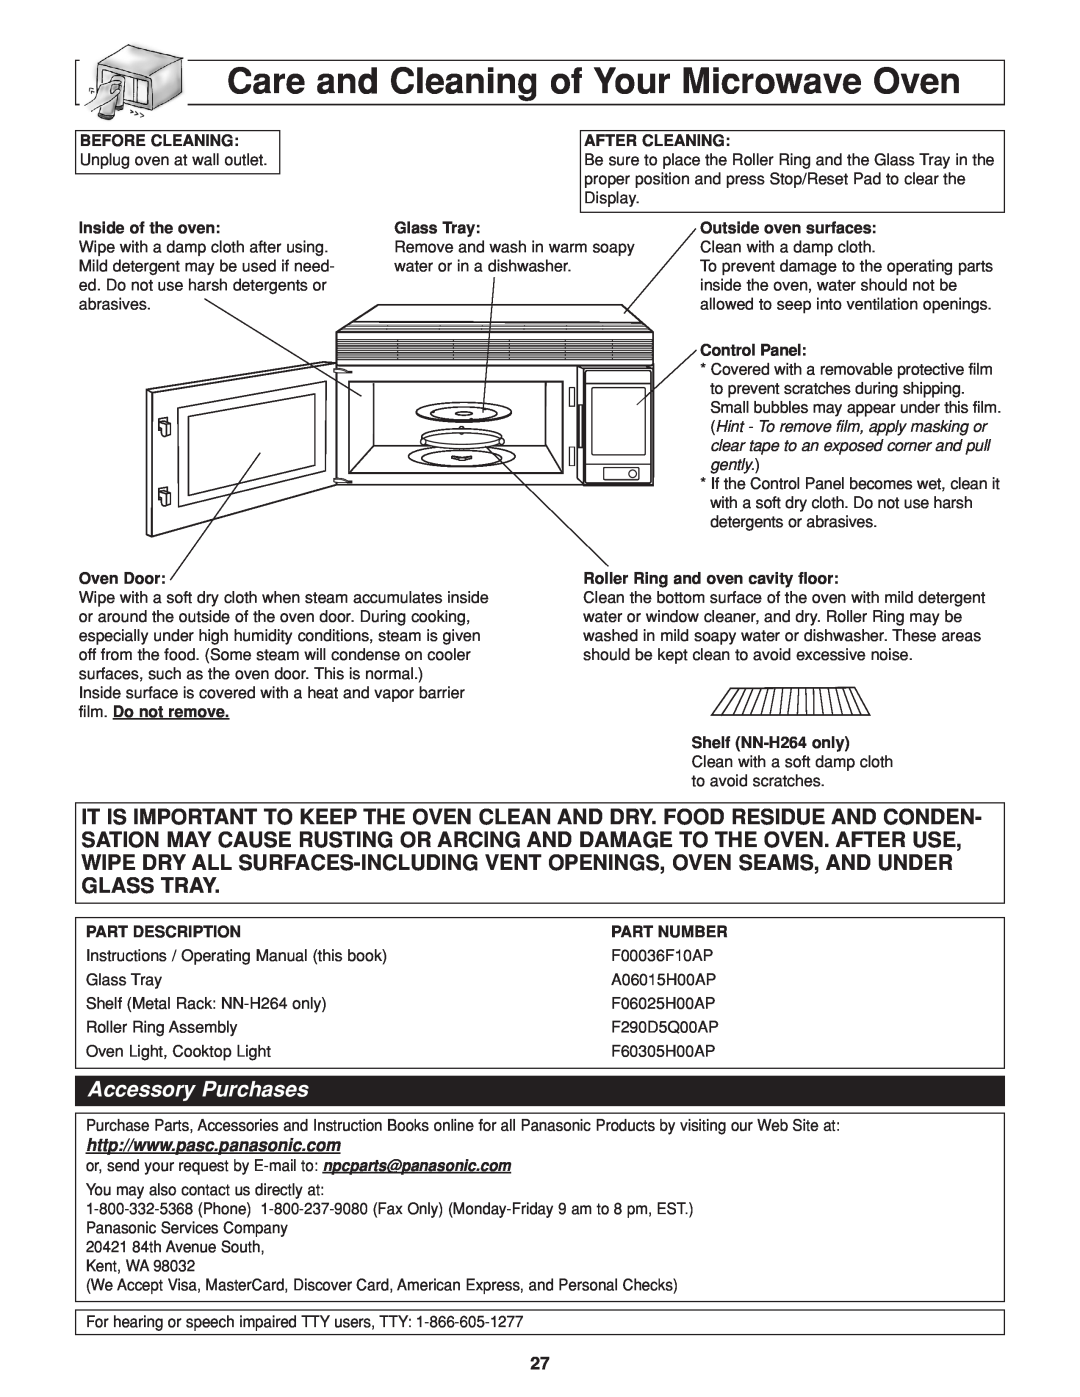 Panasonic NN-H264 important safety instructions Care and Cleaning of Your Microwave Oven, Accessory Purchases 